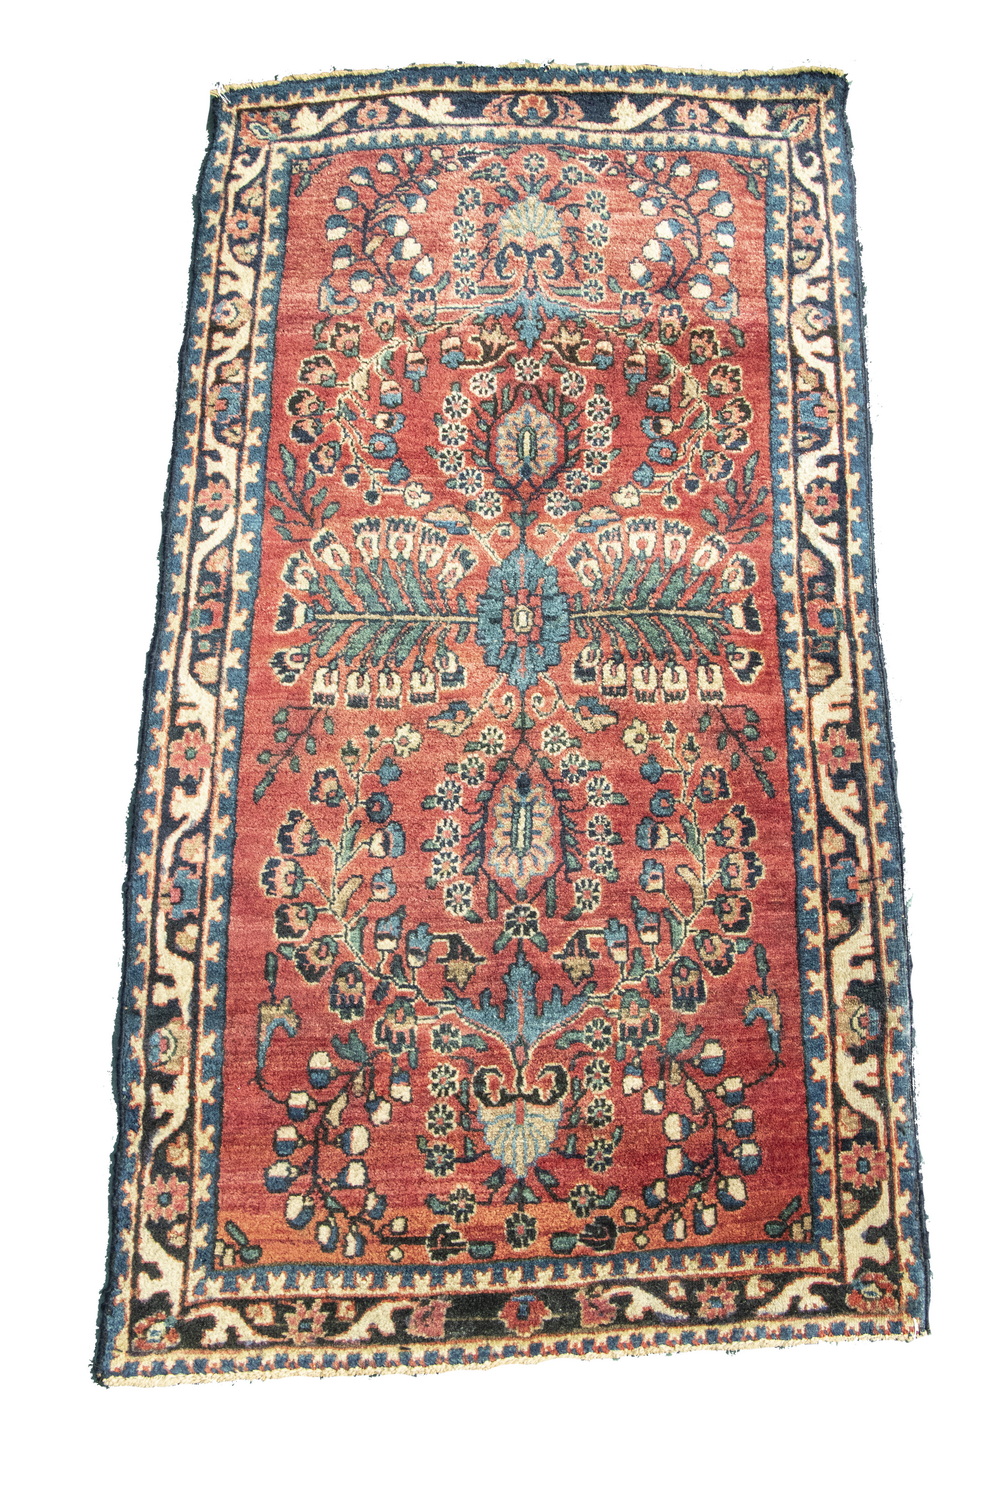 SAROUK RUG Overall design of floral